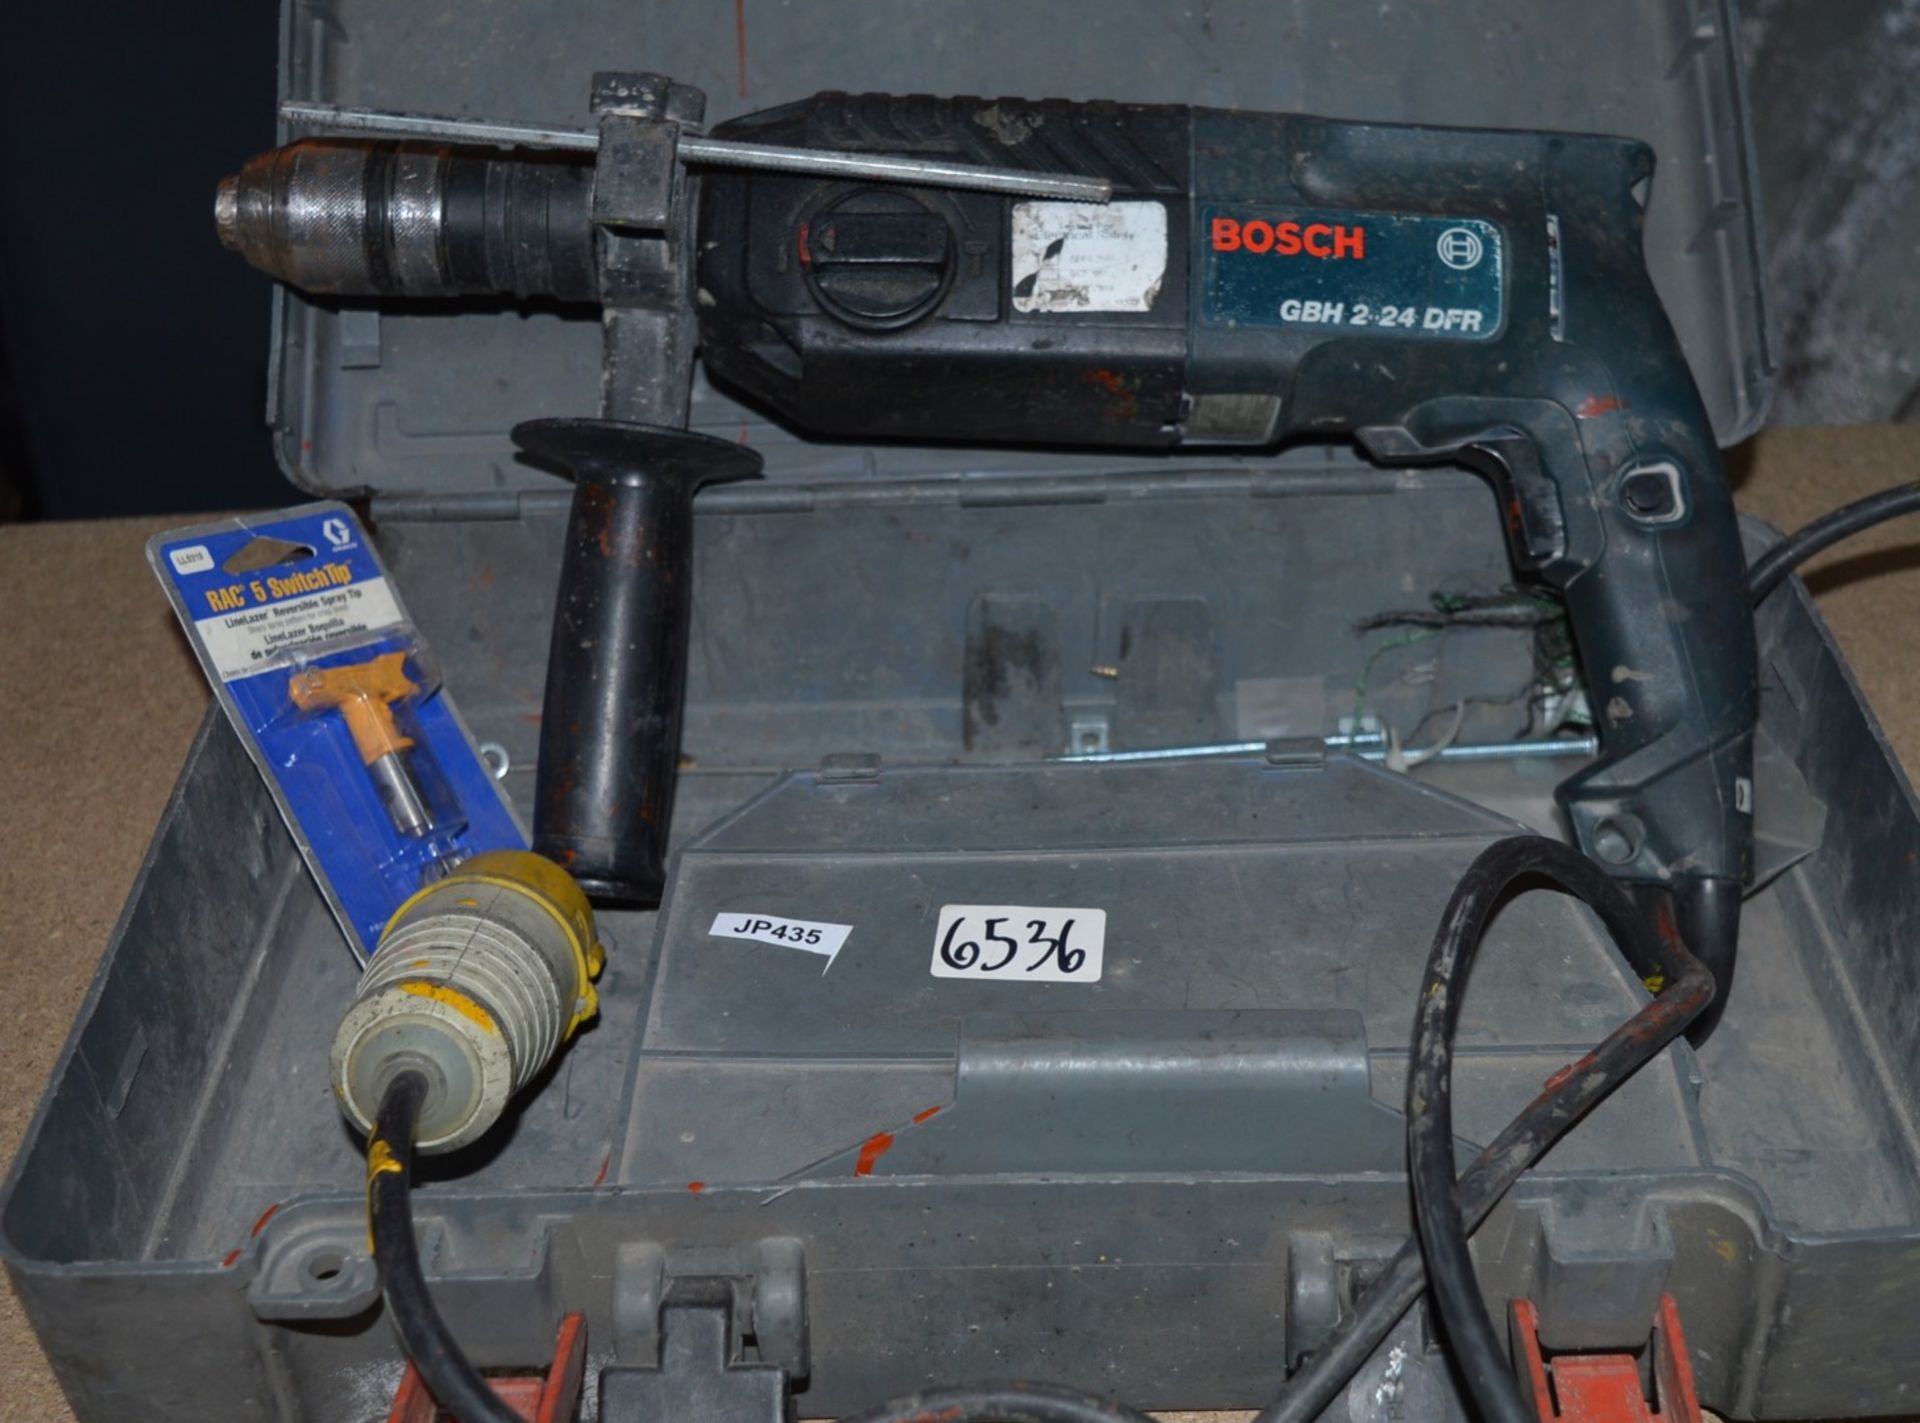 1 x Bosch GBH 2-24 DFR Hammer Drill - 110v With Case and Accessories - CL011 - Ref JP435 - Location: - Image 2 of 3